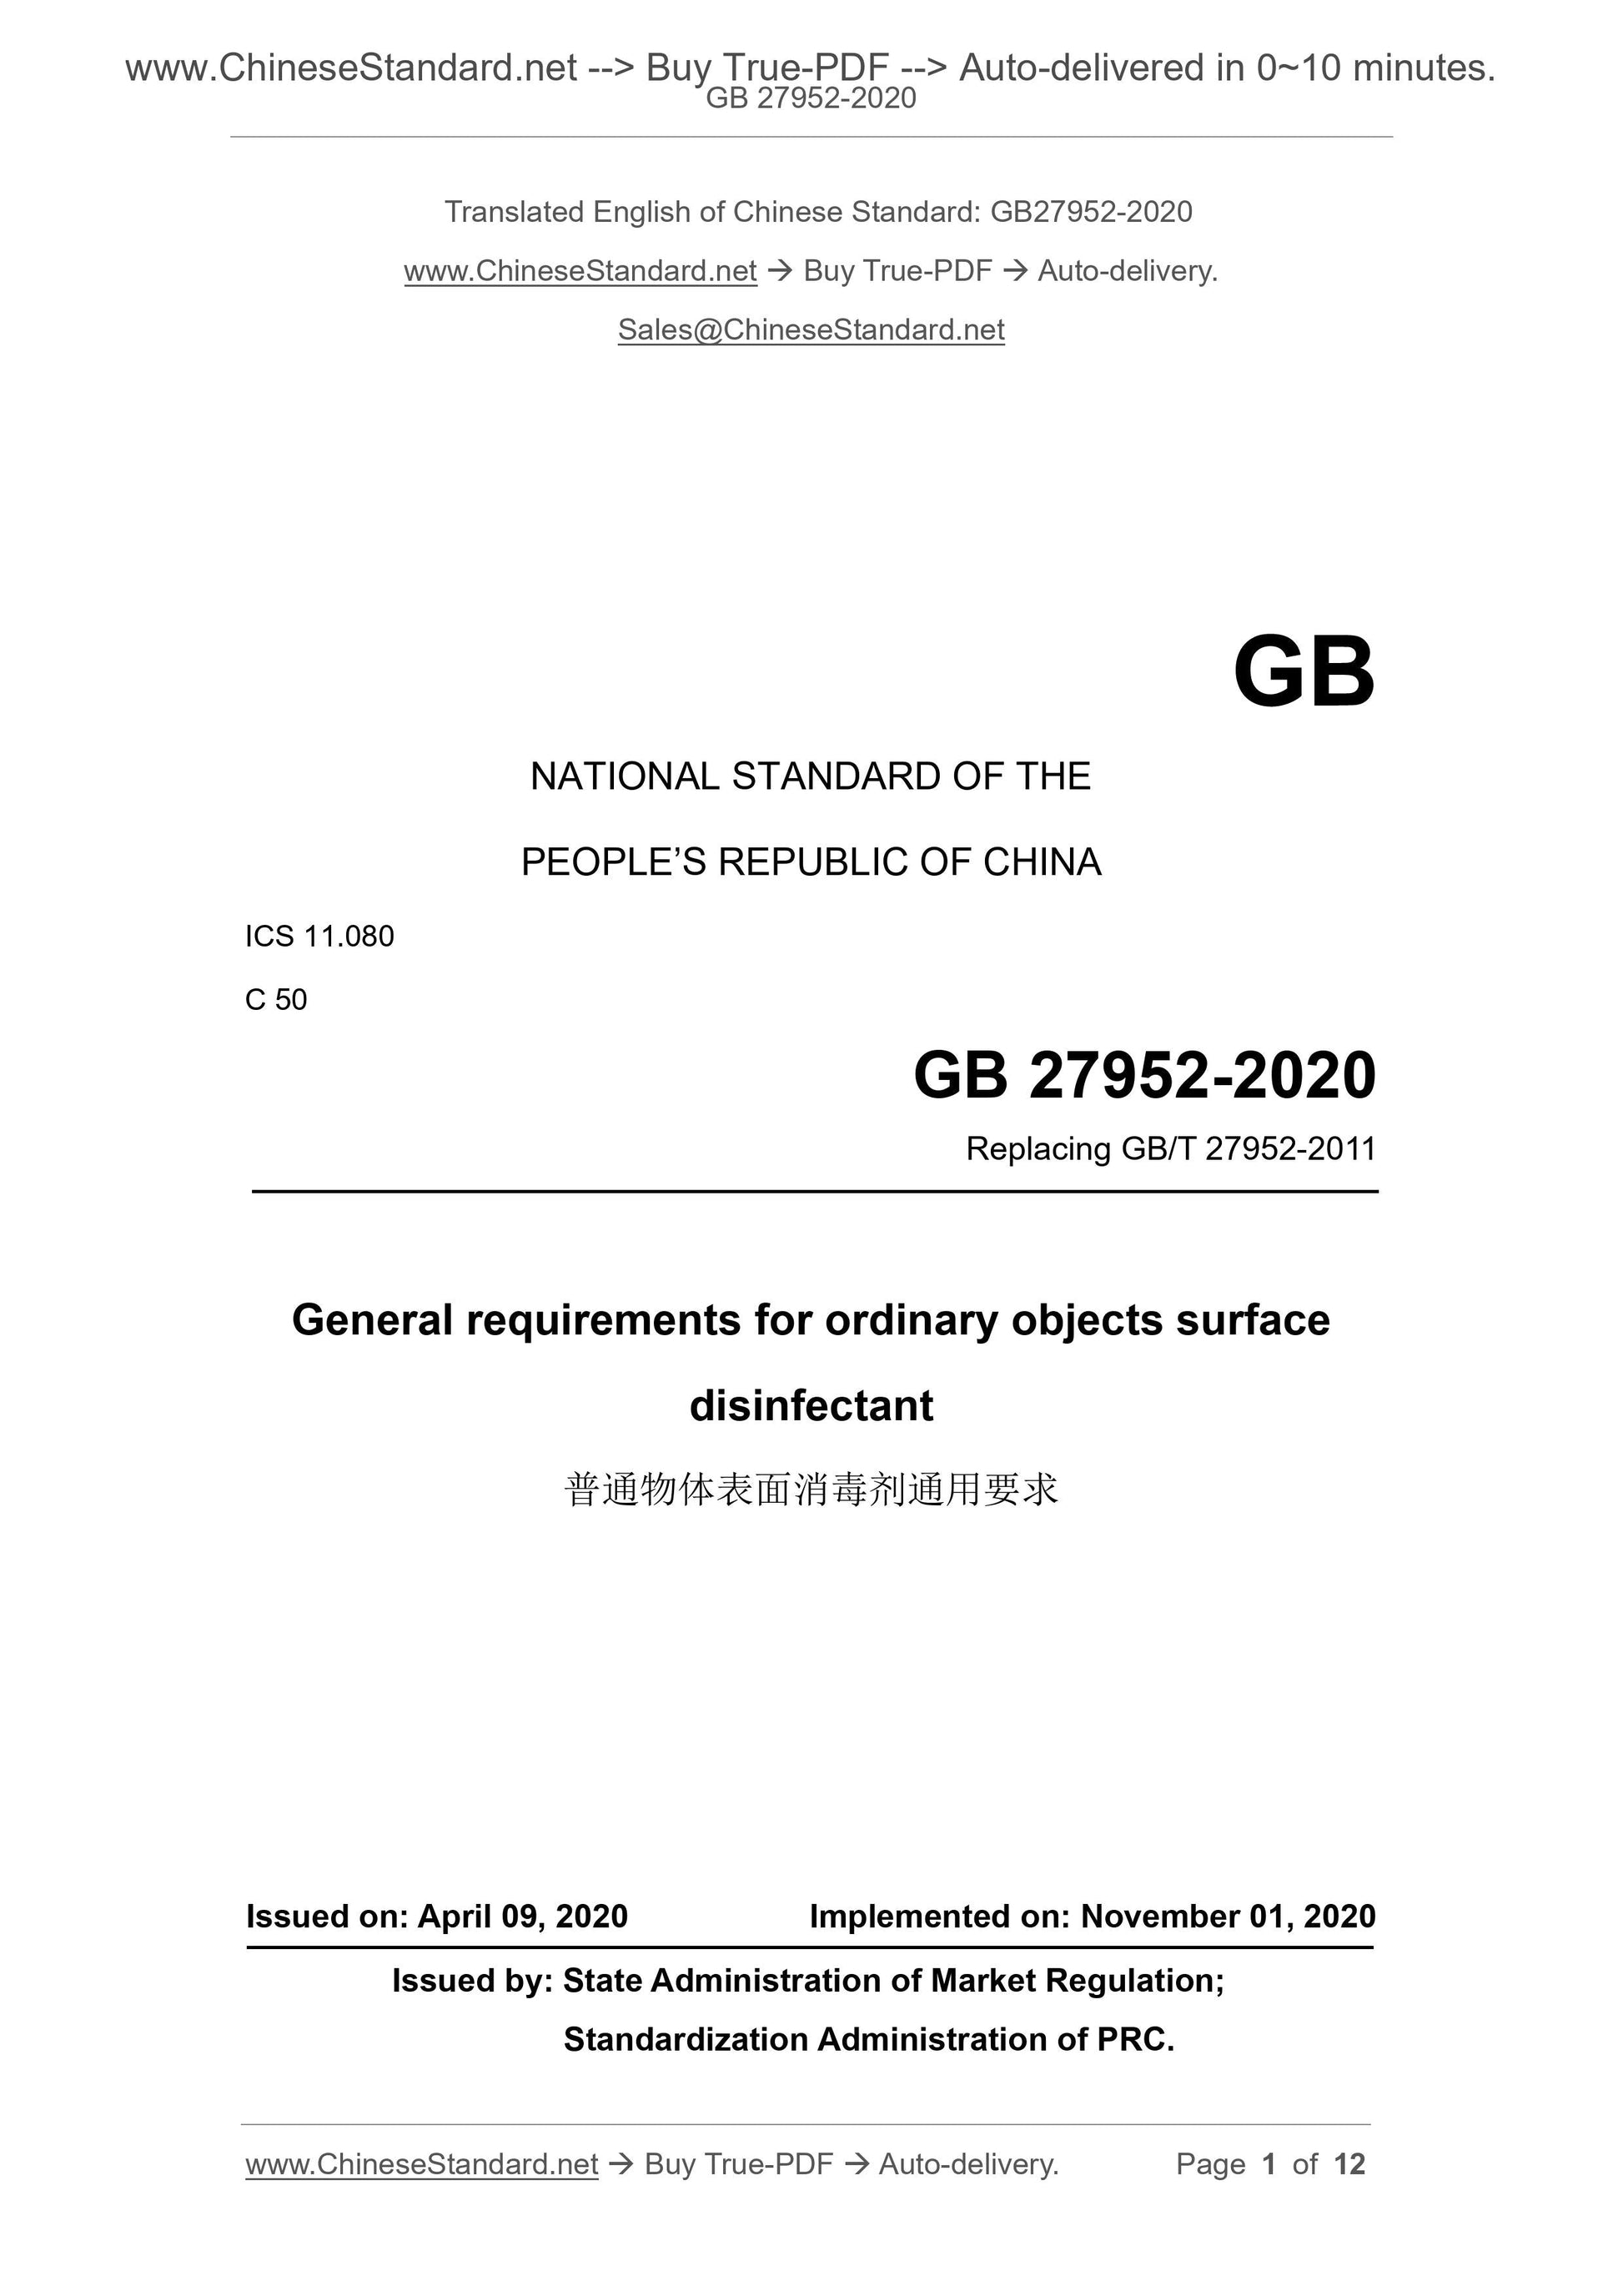 GB 27952-2020 Page 1